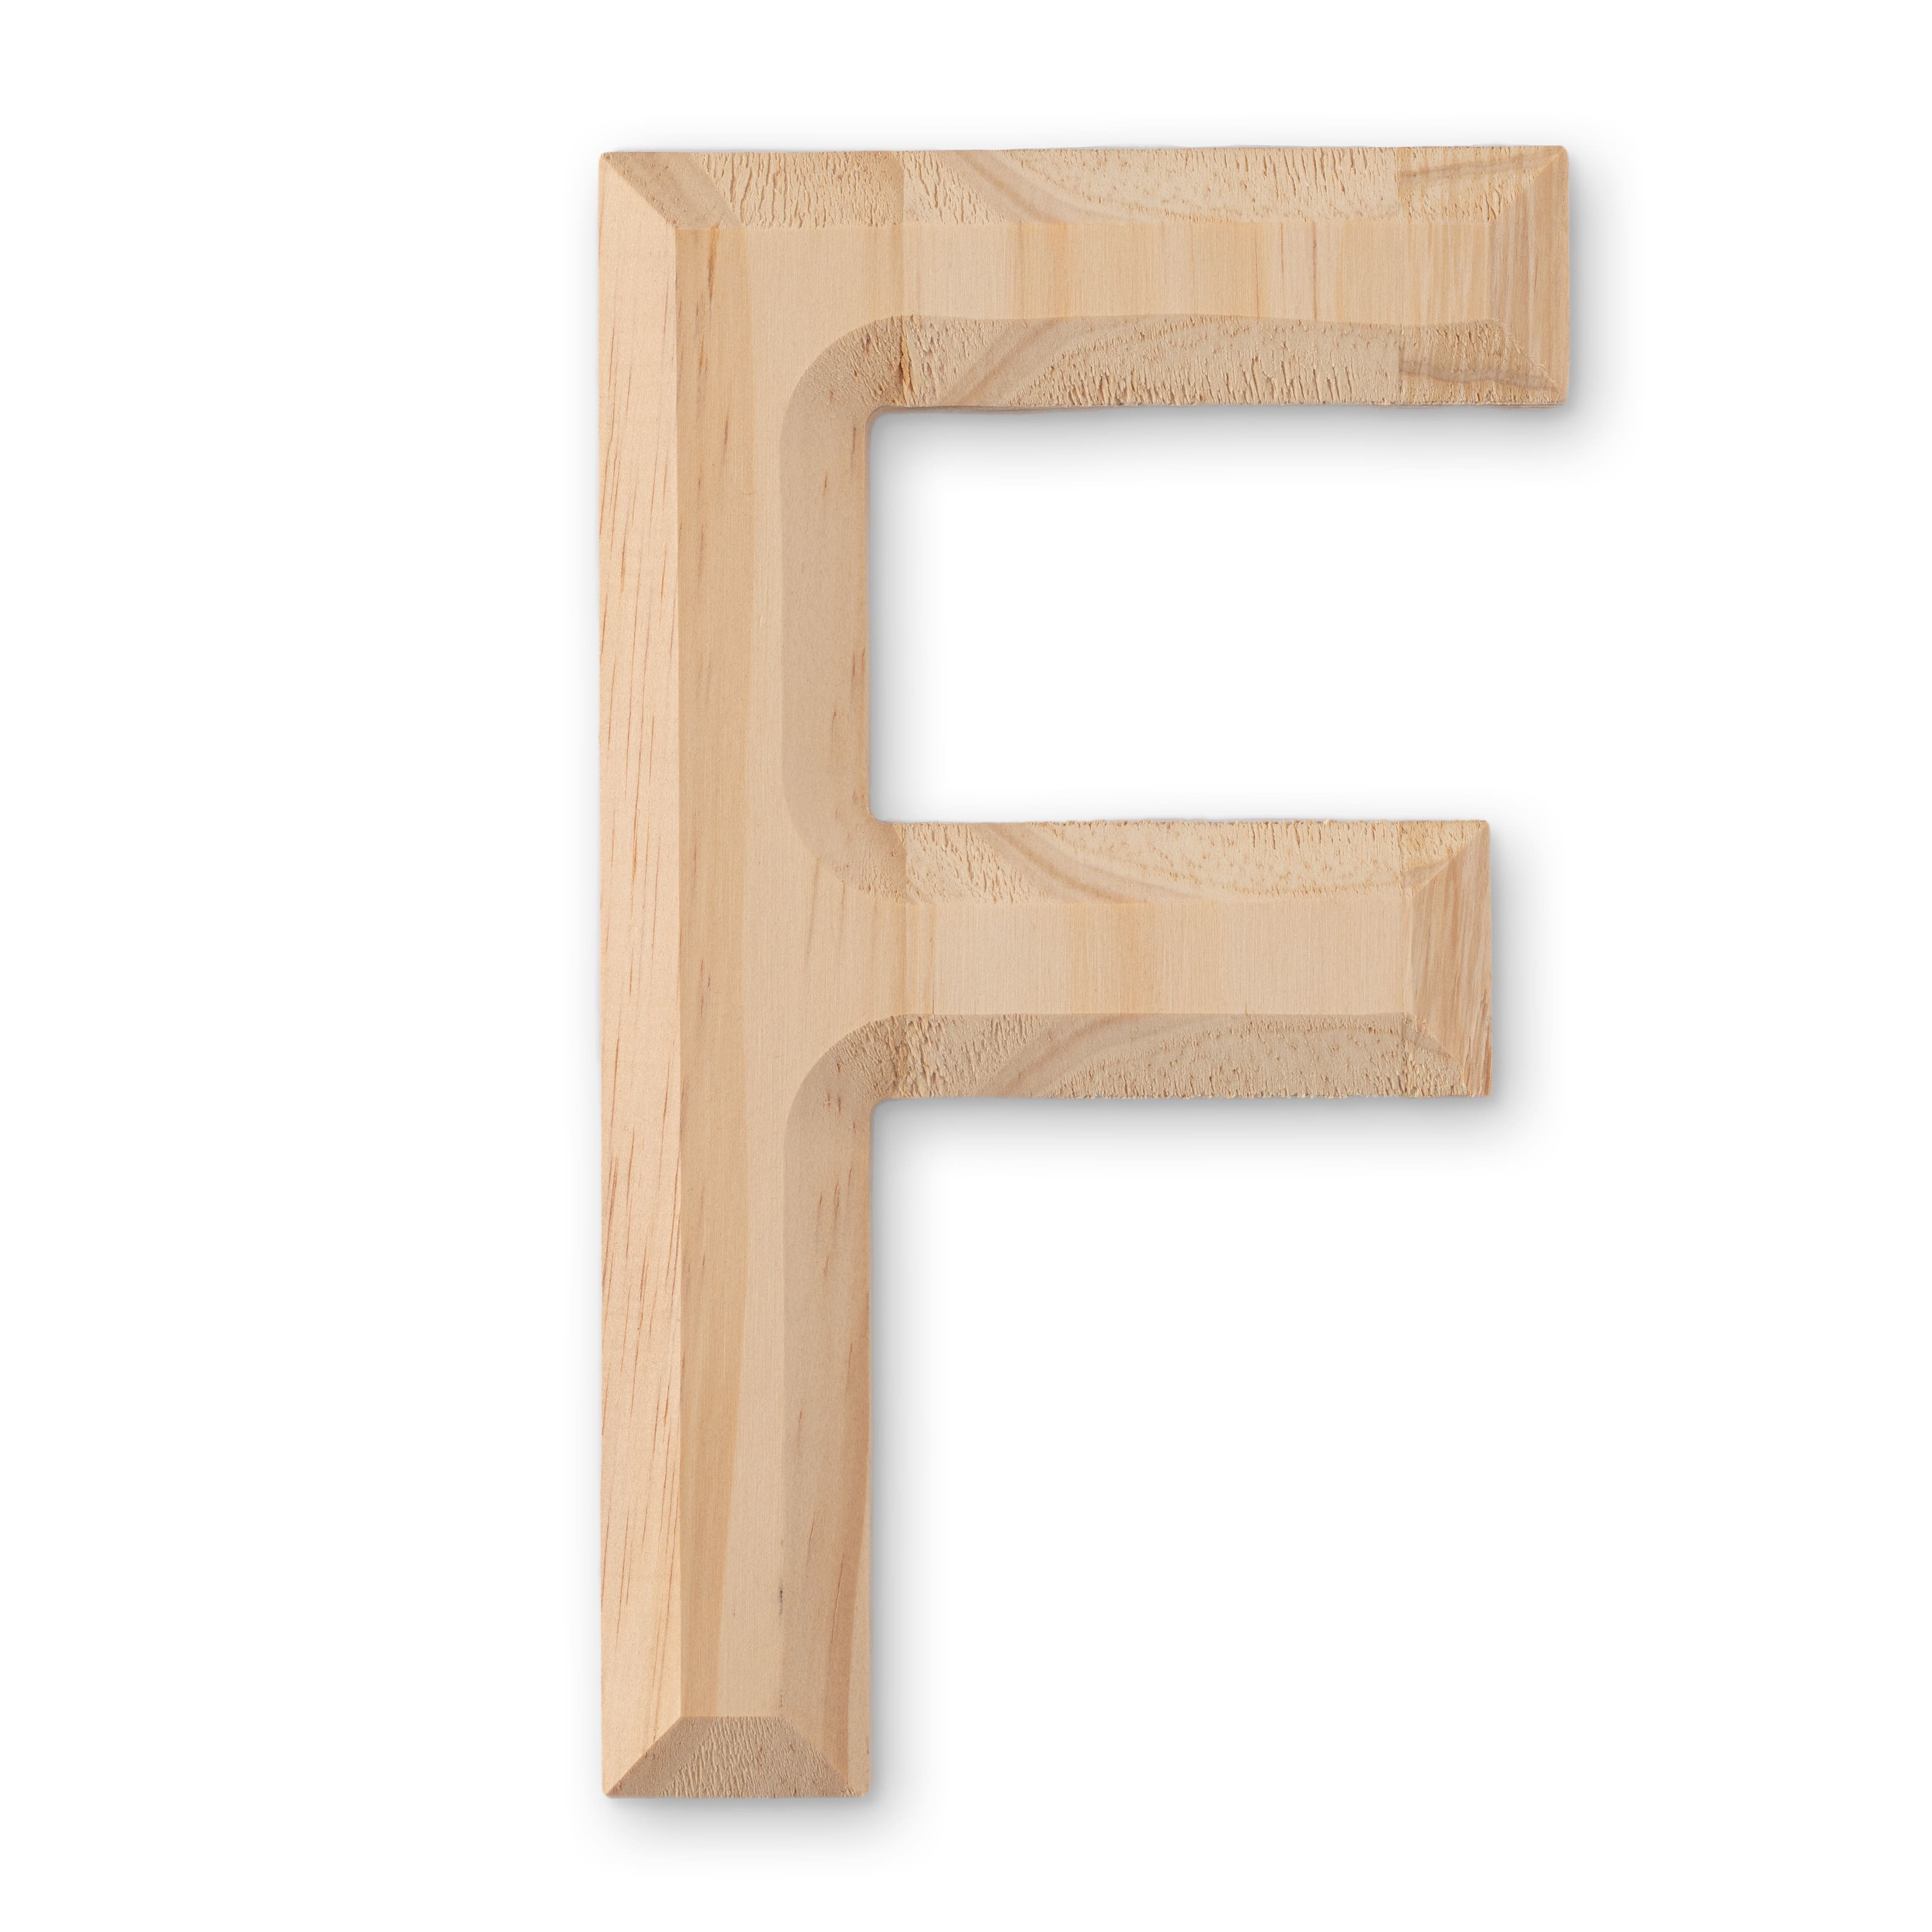 30 Styles Wooden Letters, Mini Blank Wood Symbols Capital Alphabet A-Z Letters Unfinished Wood Crafts with Storage Tray for Home